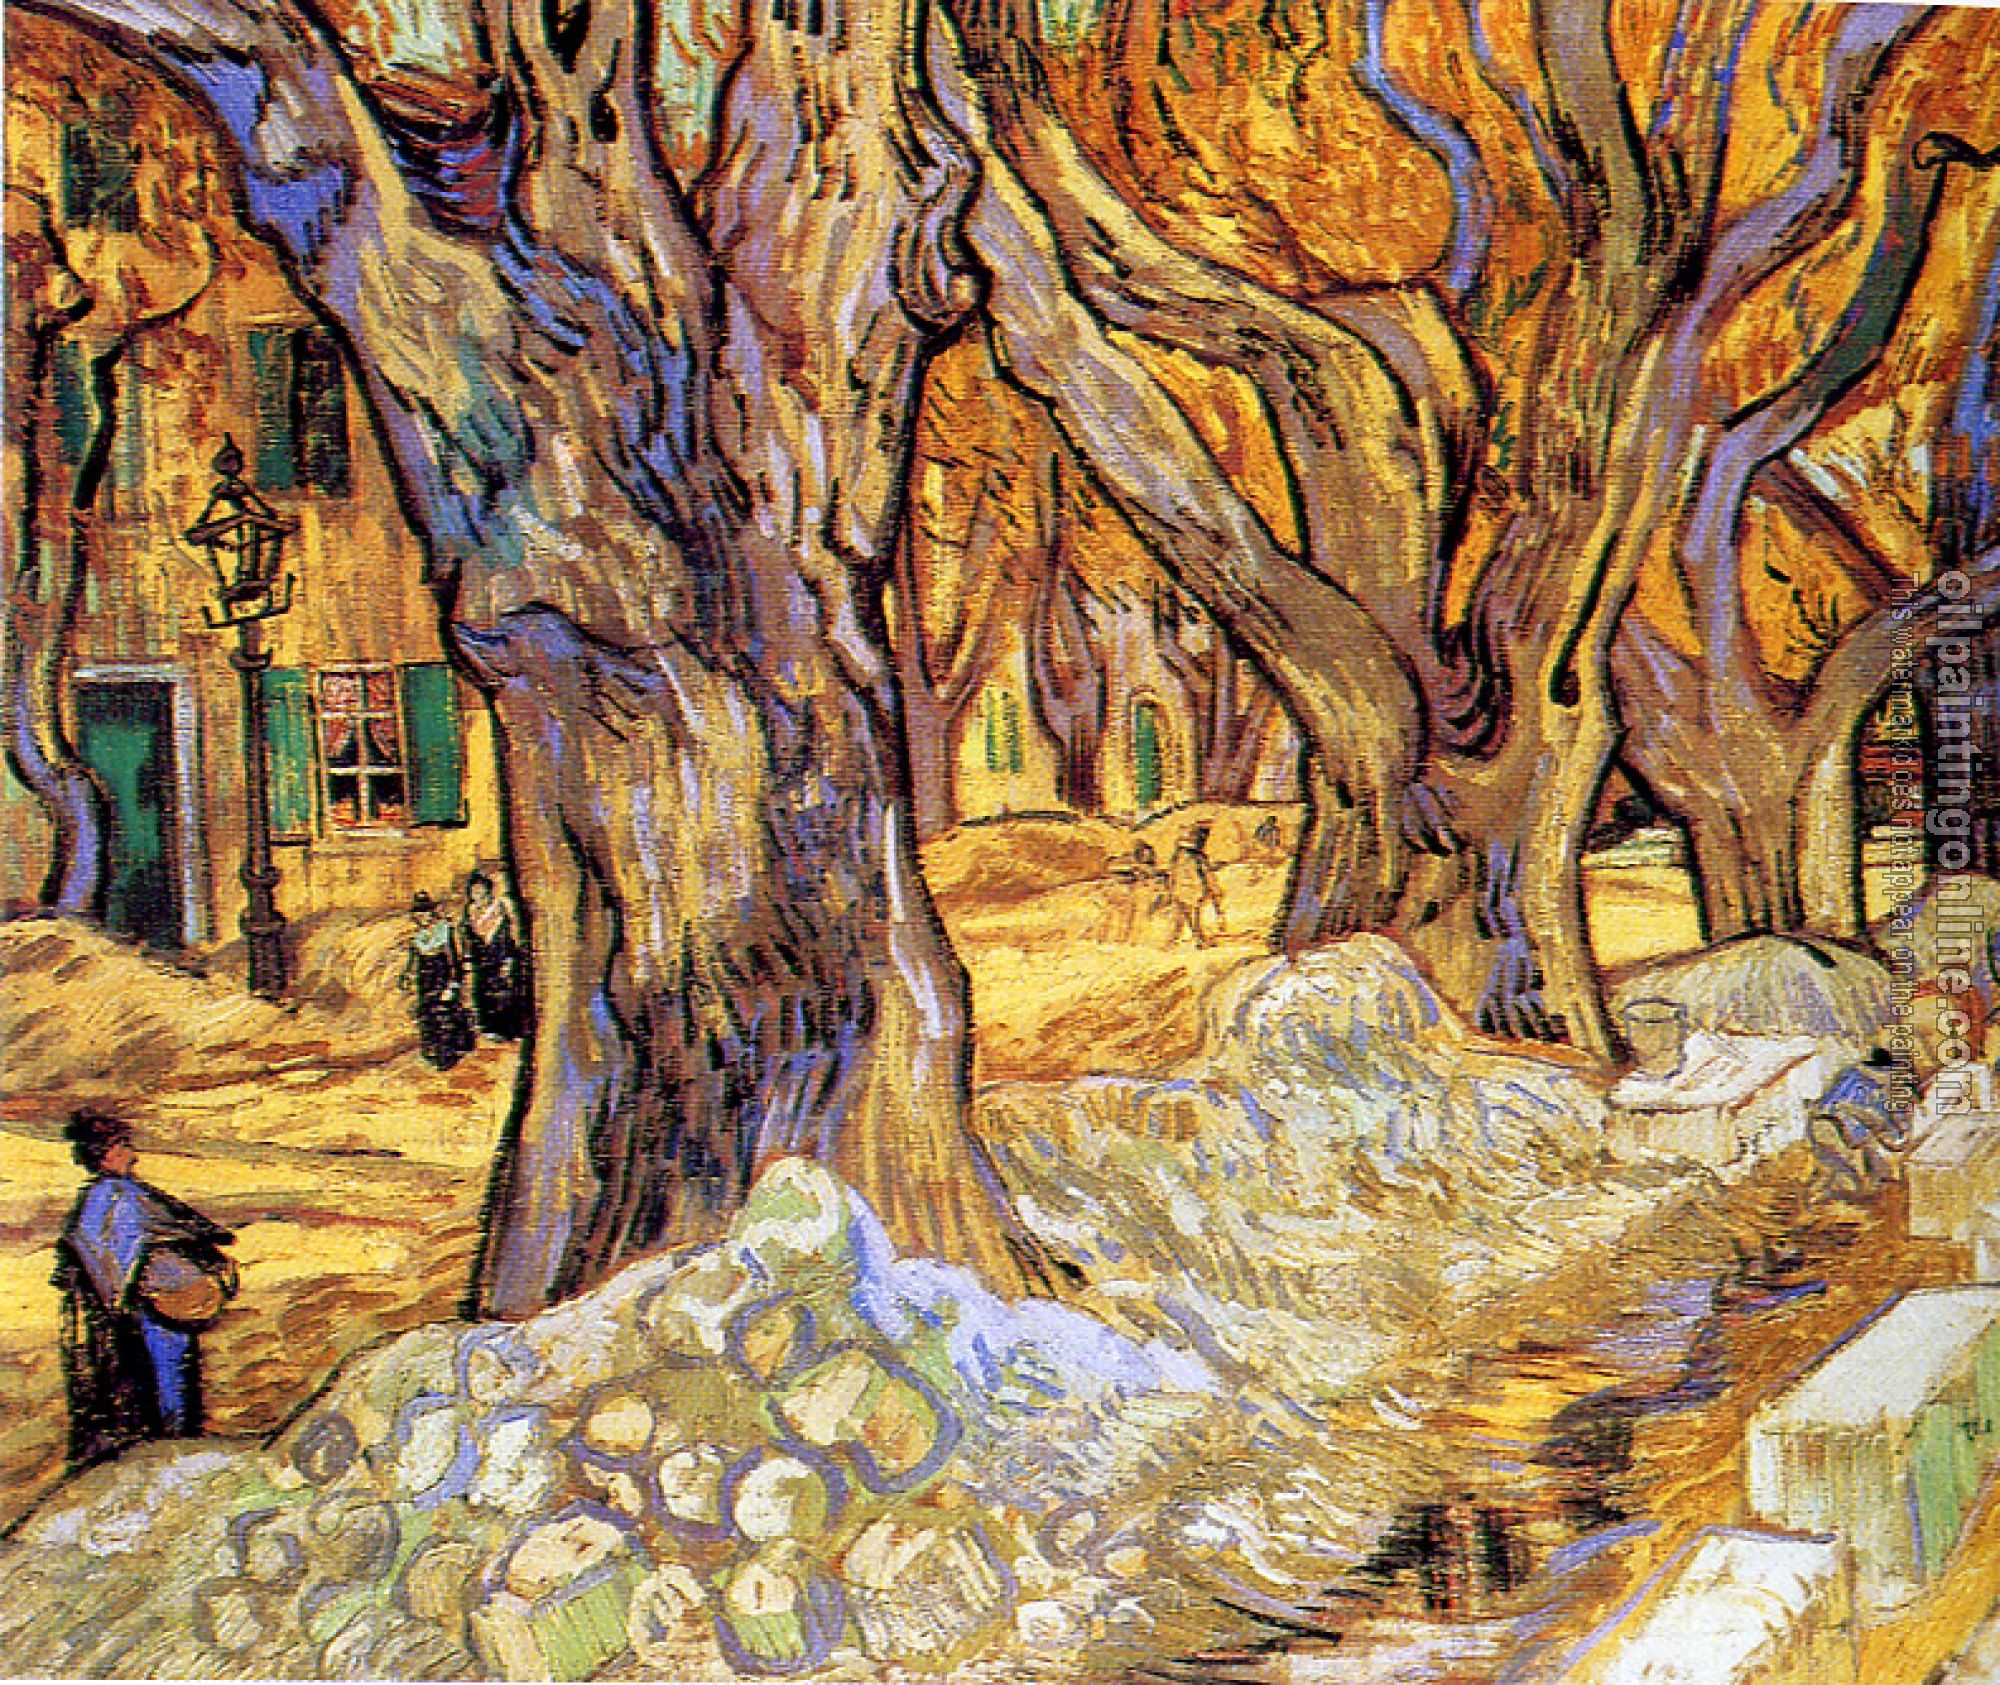 Gogh, Vincent van - Road Menders in a Lane with Massive Plane Trees